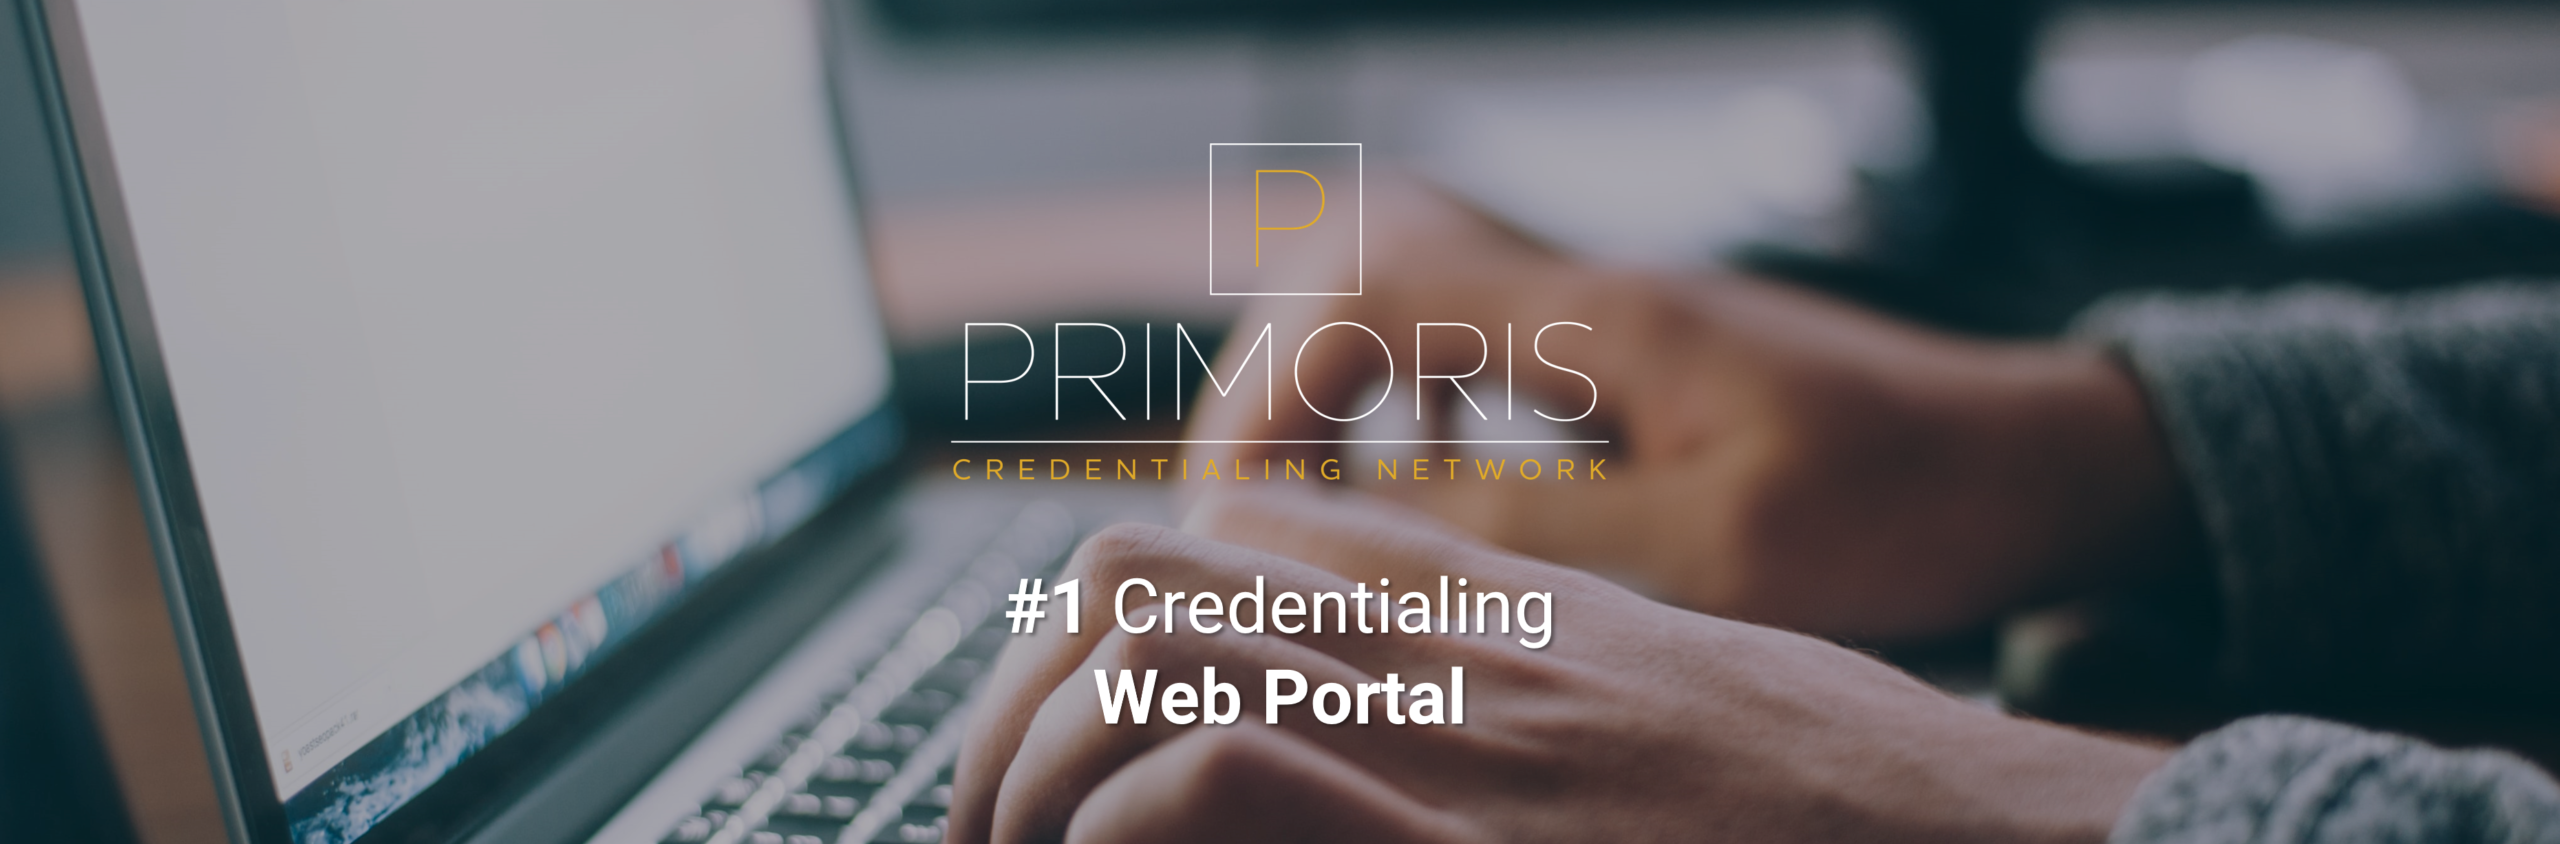 #1 Credentialing Web Portal With Primoris Credentialing Network